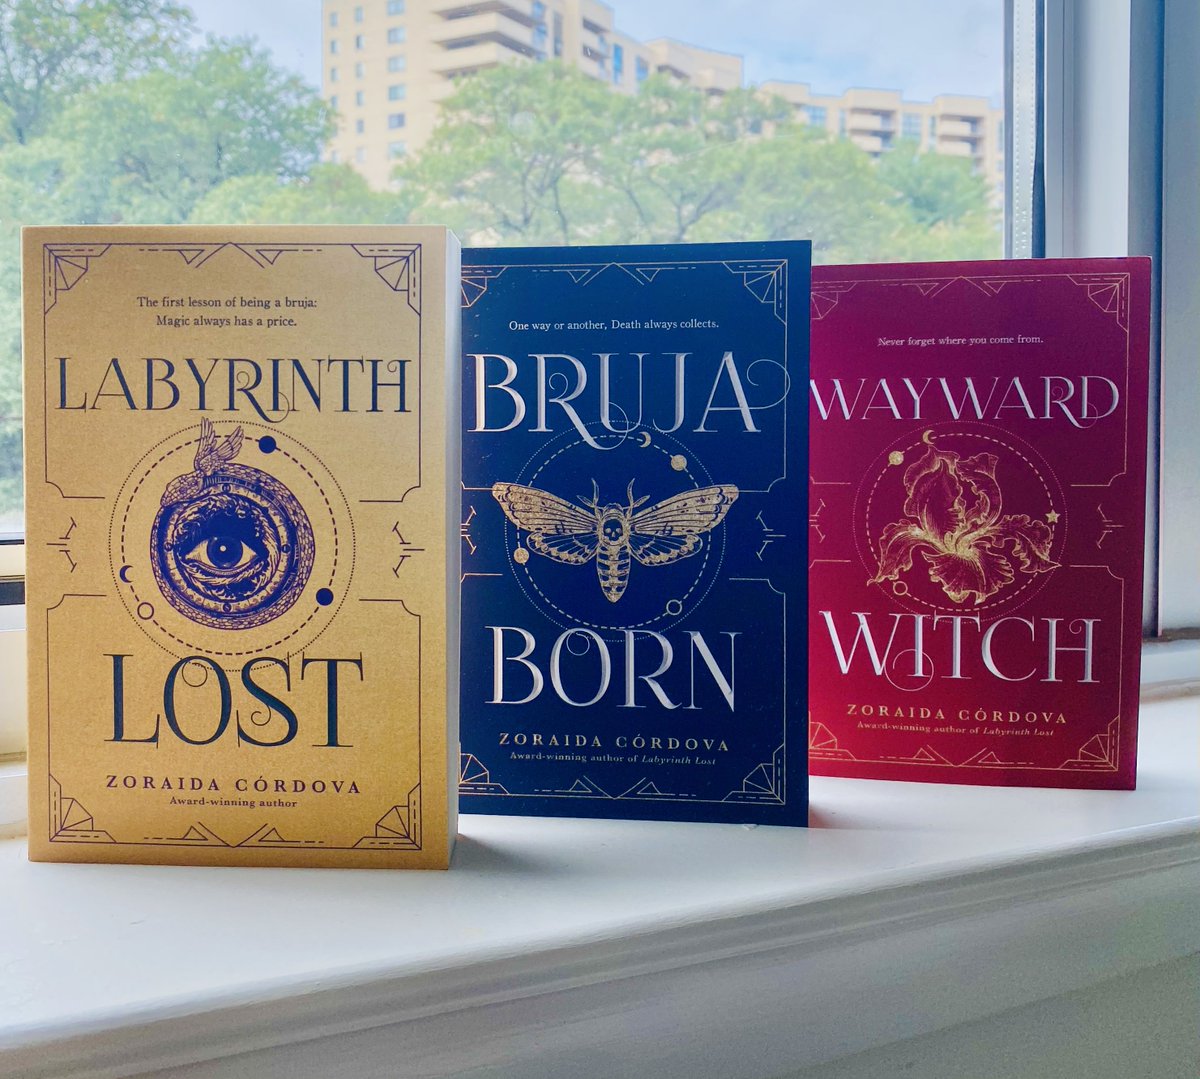 Kick off #ESPOOKYSeason with the Brooklyn Brujas Series by @zlikeinzorro 🎃👻 The #BrooklynBrujas Bundle is now available for $29.50
📕Labyrinth Lost
📗Bruja Born
📘Wayward Witch
Shop now at XOLOBOOKS.COM
#sale #latinxauthors #LGBTQIA #booksale #shopsmall